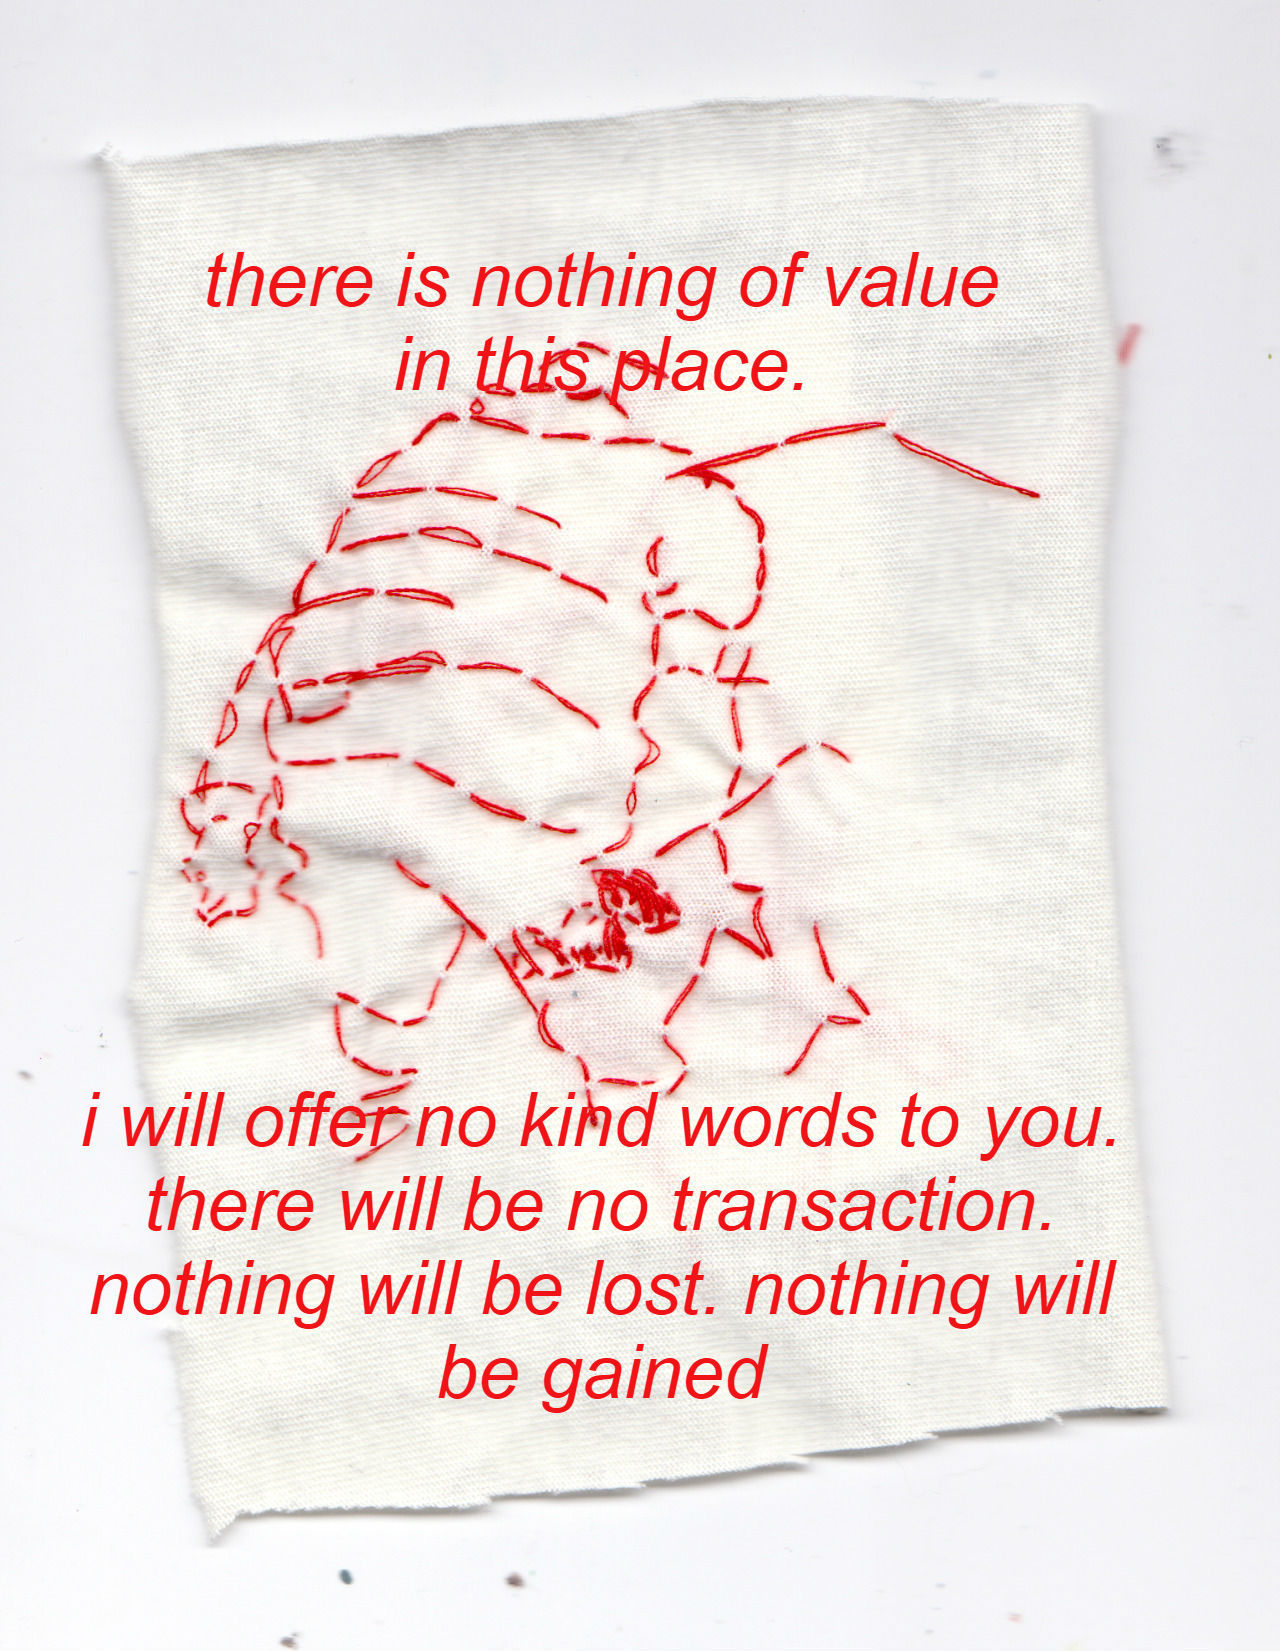 Value of Nothing on Tumblr